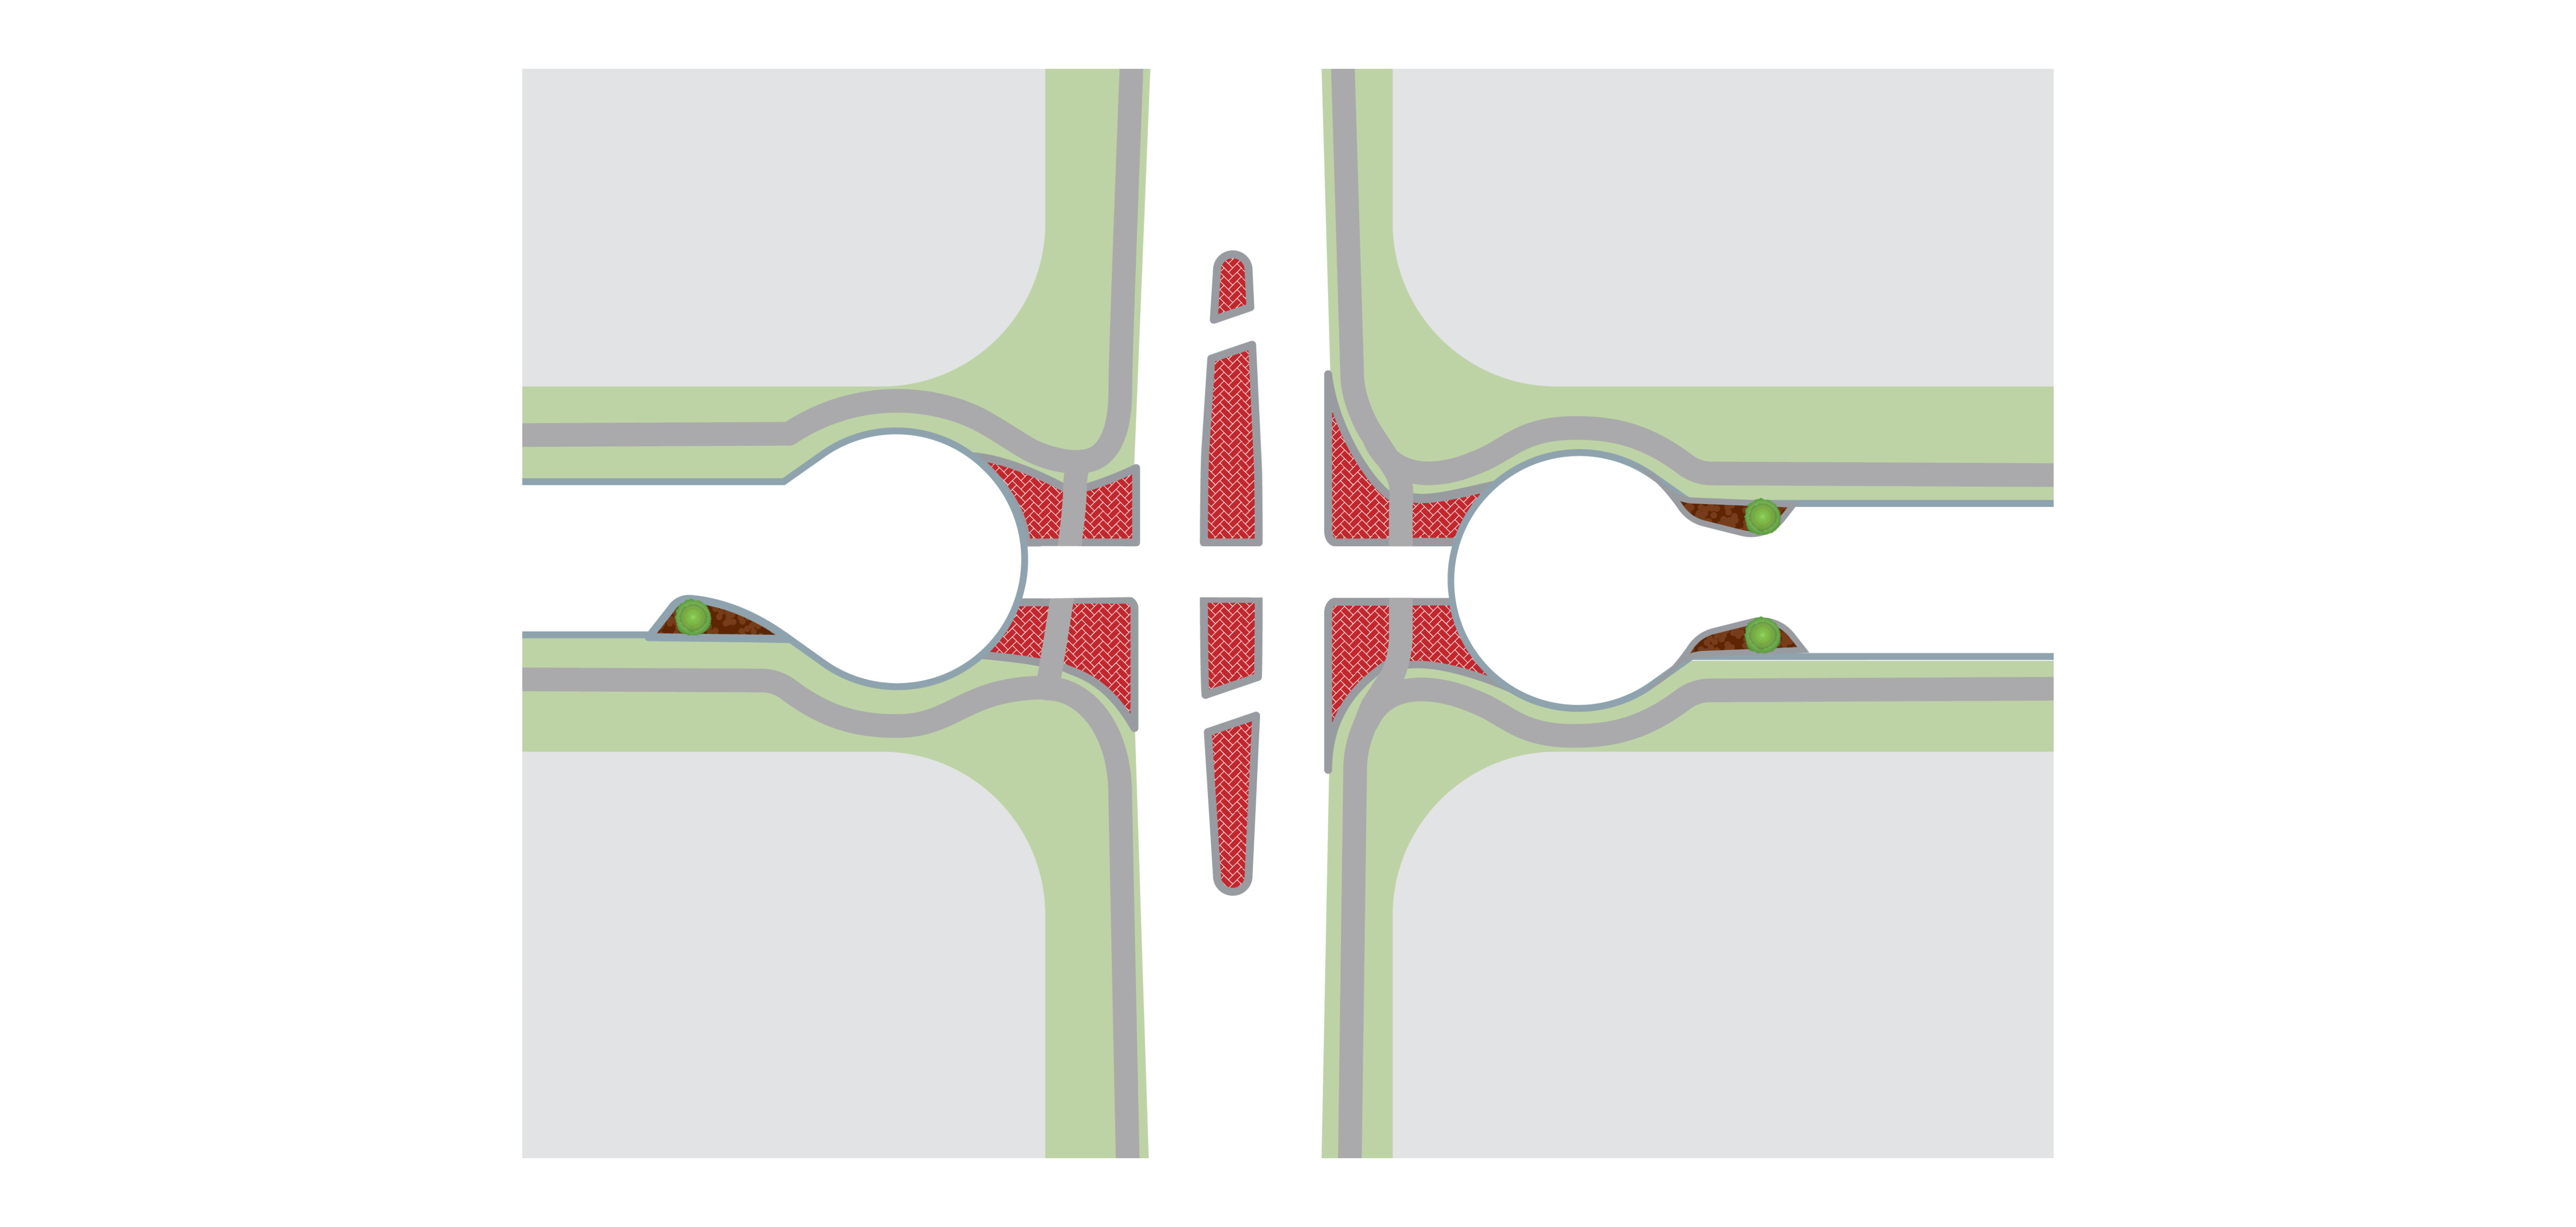 An example of a typical route crossing of a major road